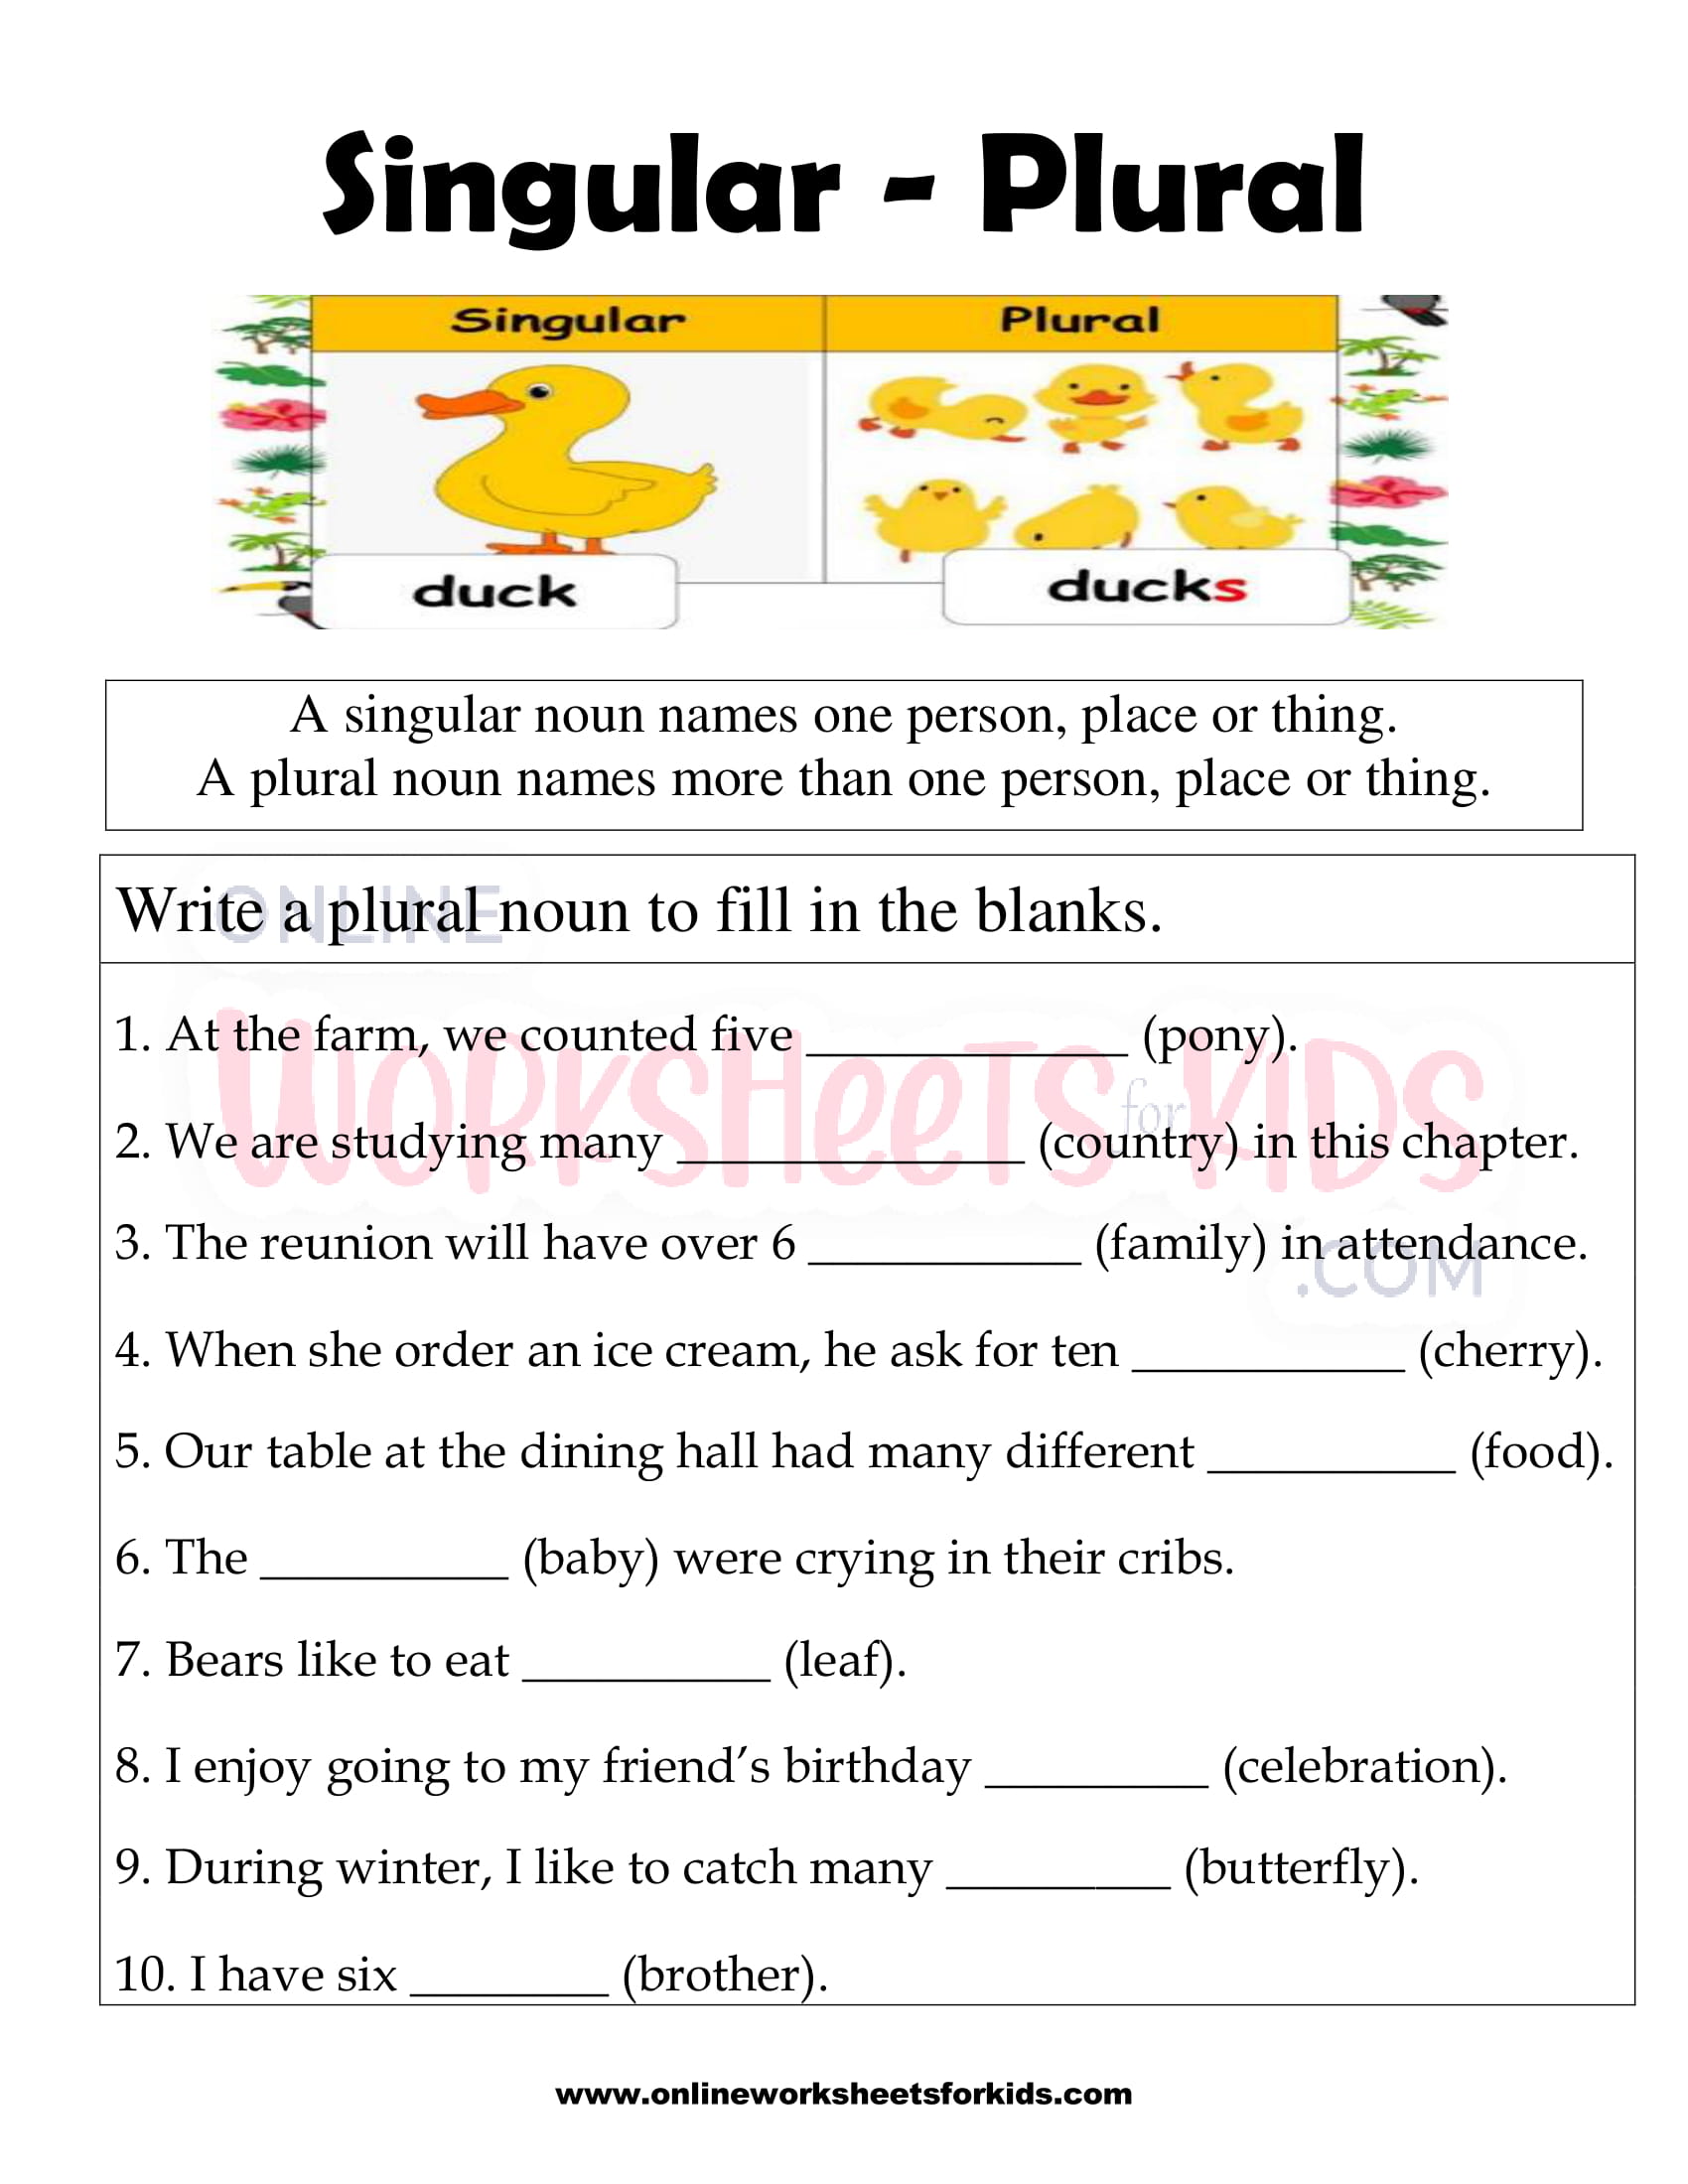 Singular And Plural Nouns Worksheet For Grade 3 With Answers